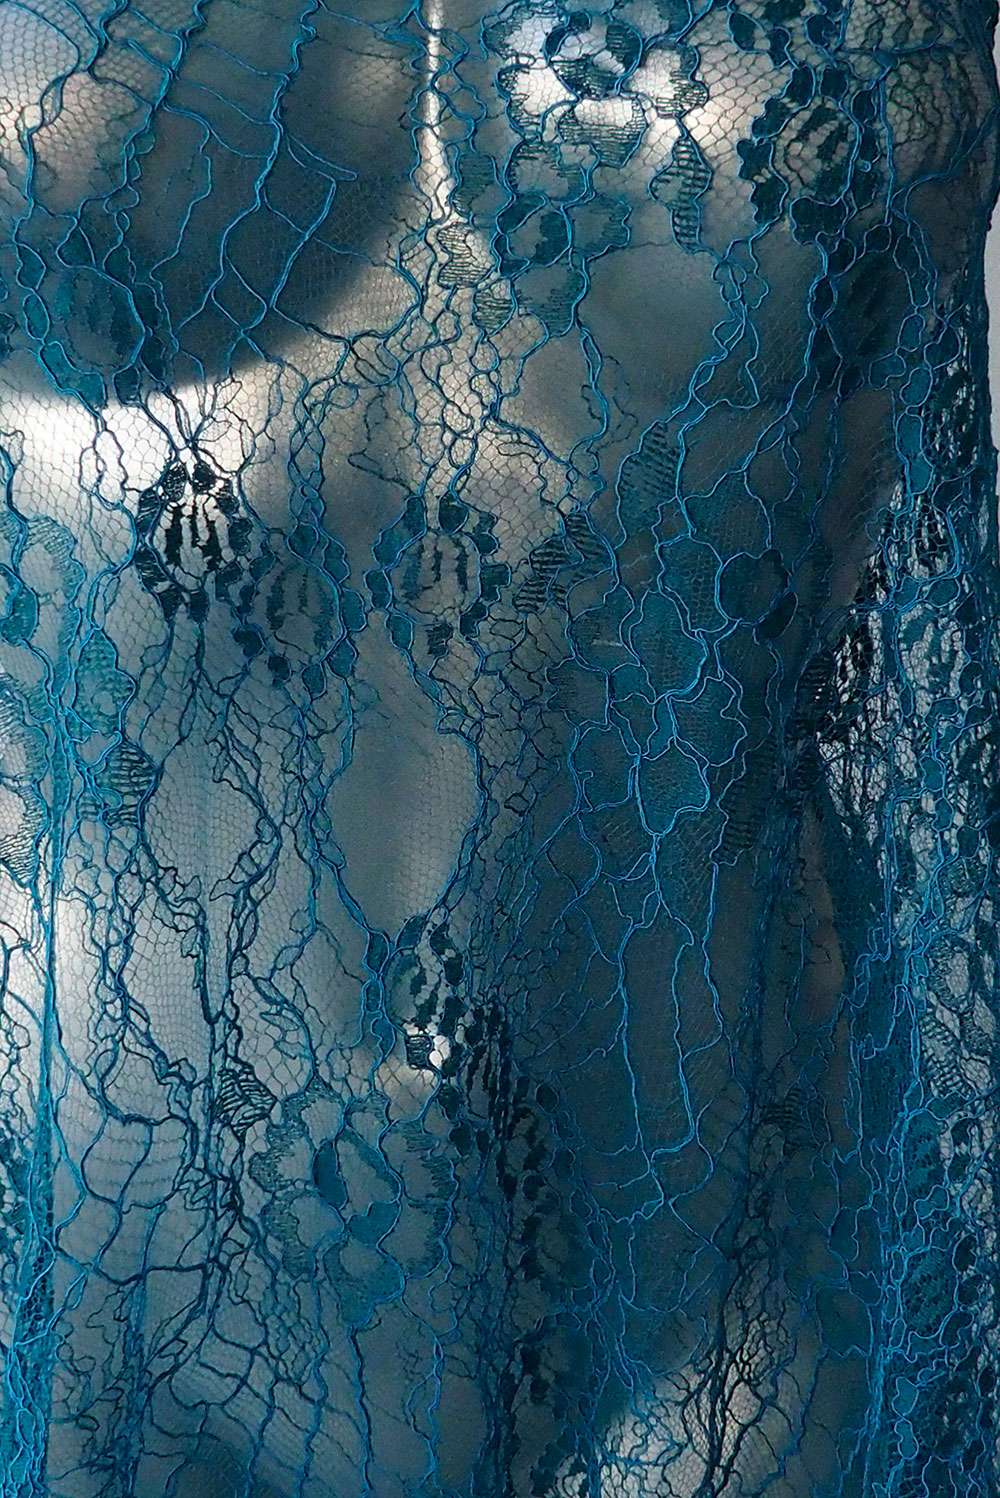 Teal blue lace fabric, French Lace, floral Solstiss corded lace scallop  edge eyelashes mother of bride bridal cocktail dress Burlesque, 95cm wide